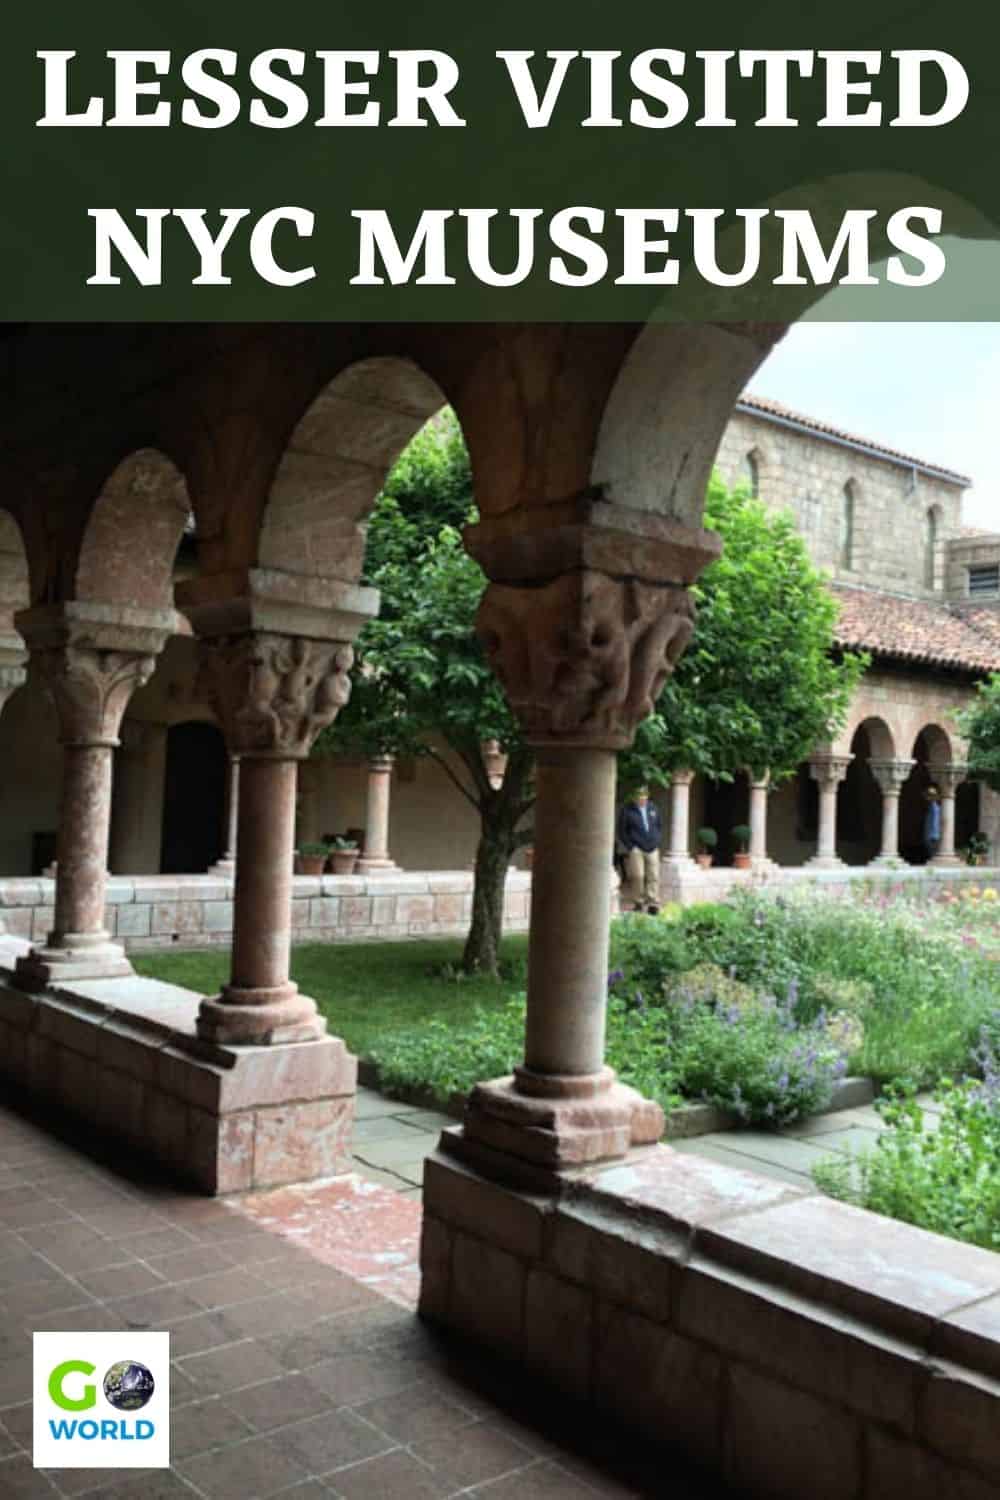 Already been to the Met and the MoMA? Check out these lesser-visited cool NYC museums like the Skyscraper Museum and the Met Cloisters. #nycmuseums #whattodoinnyc